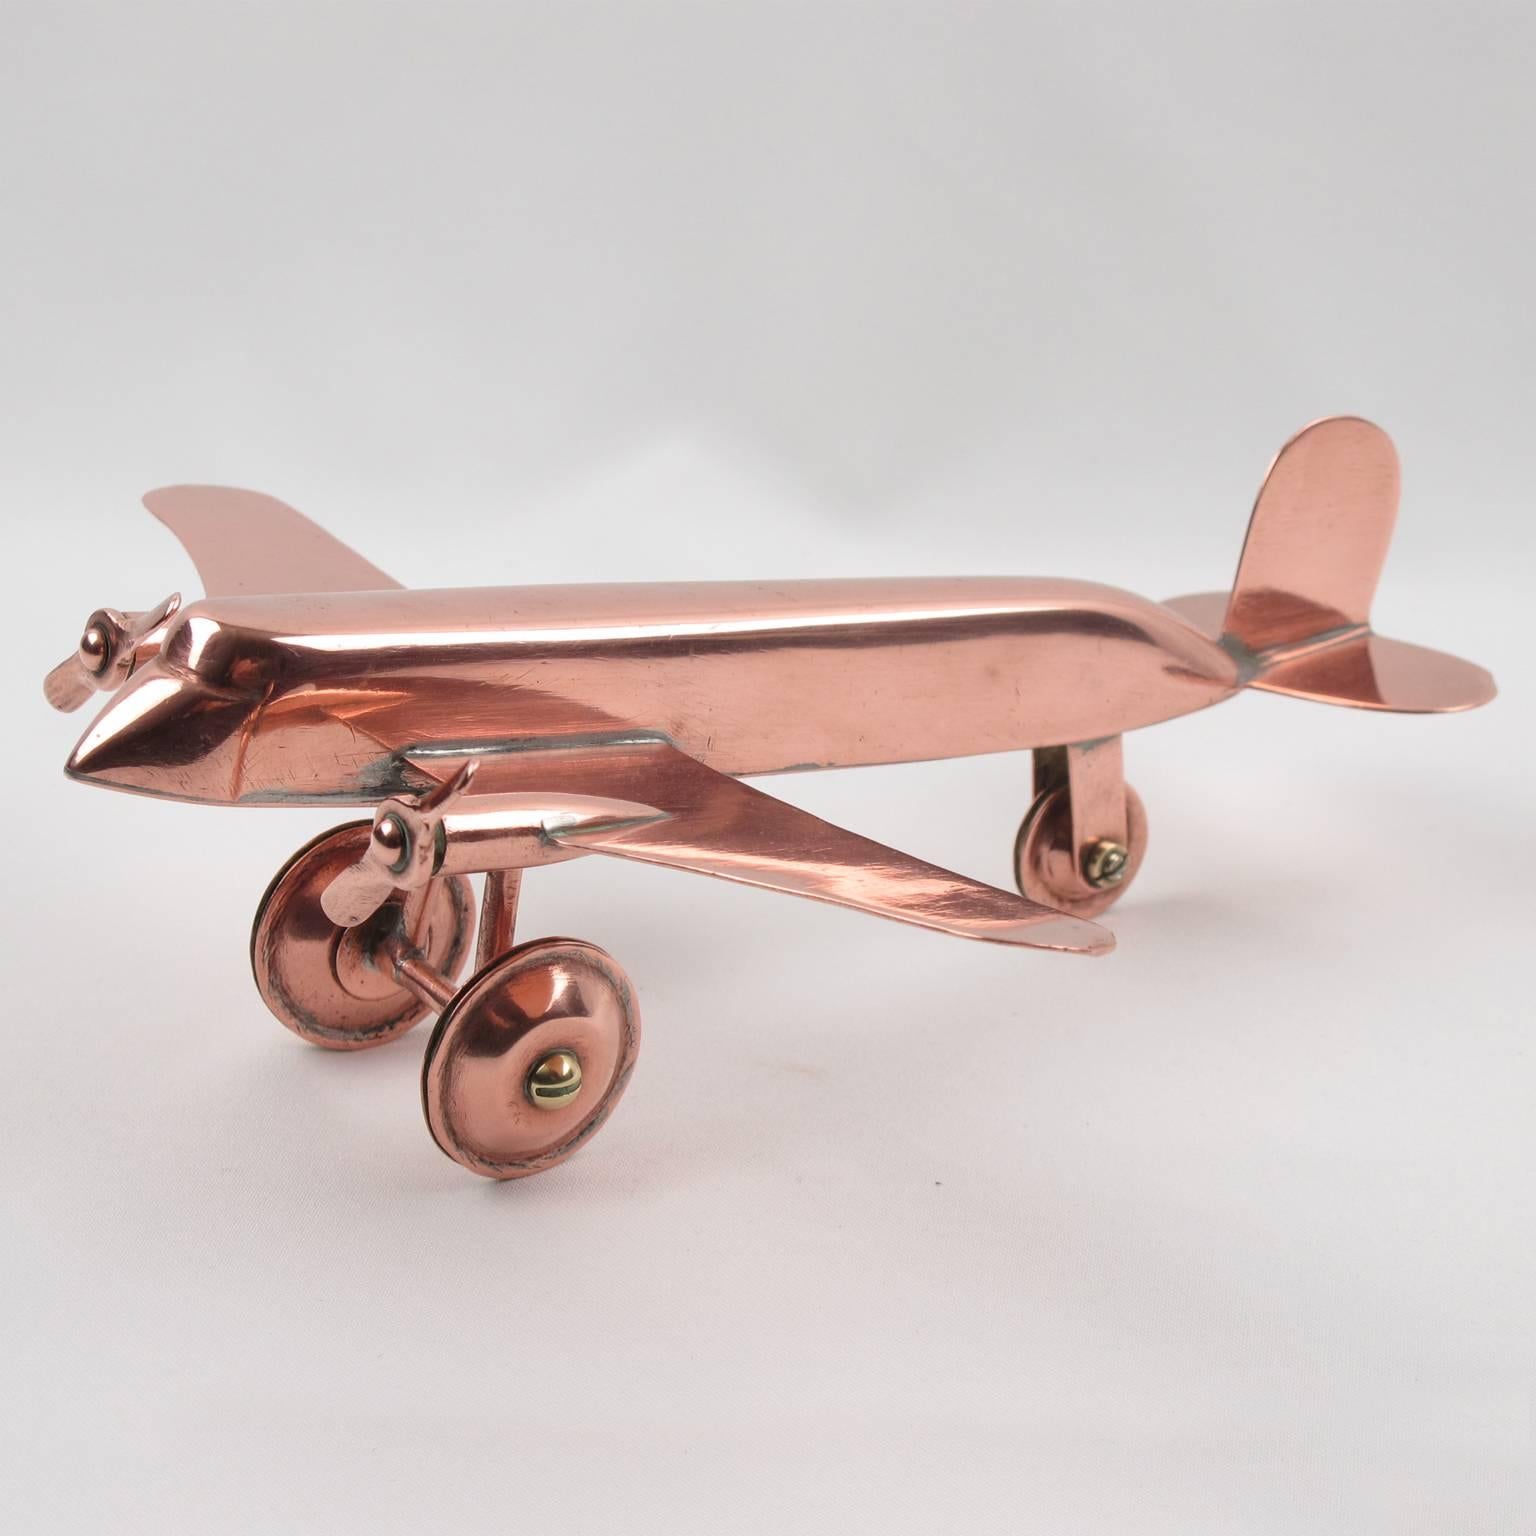 French 1950s Mid-Century Modernist Copper Airplane Model